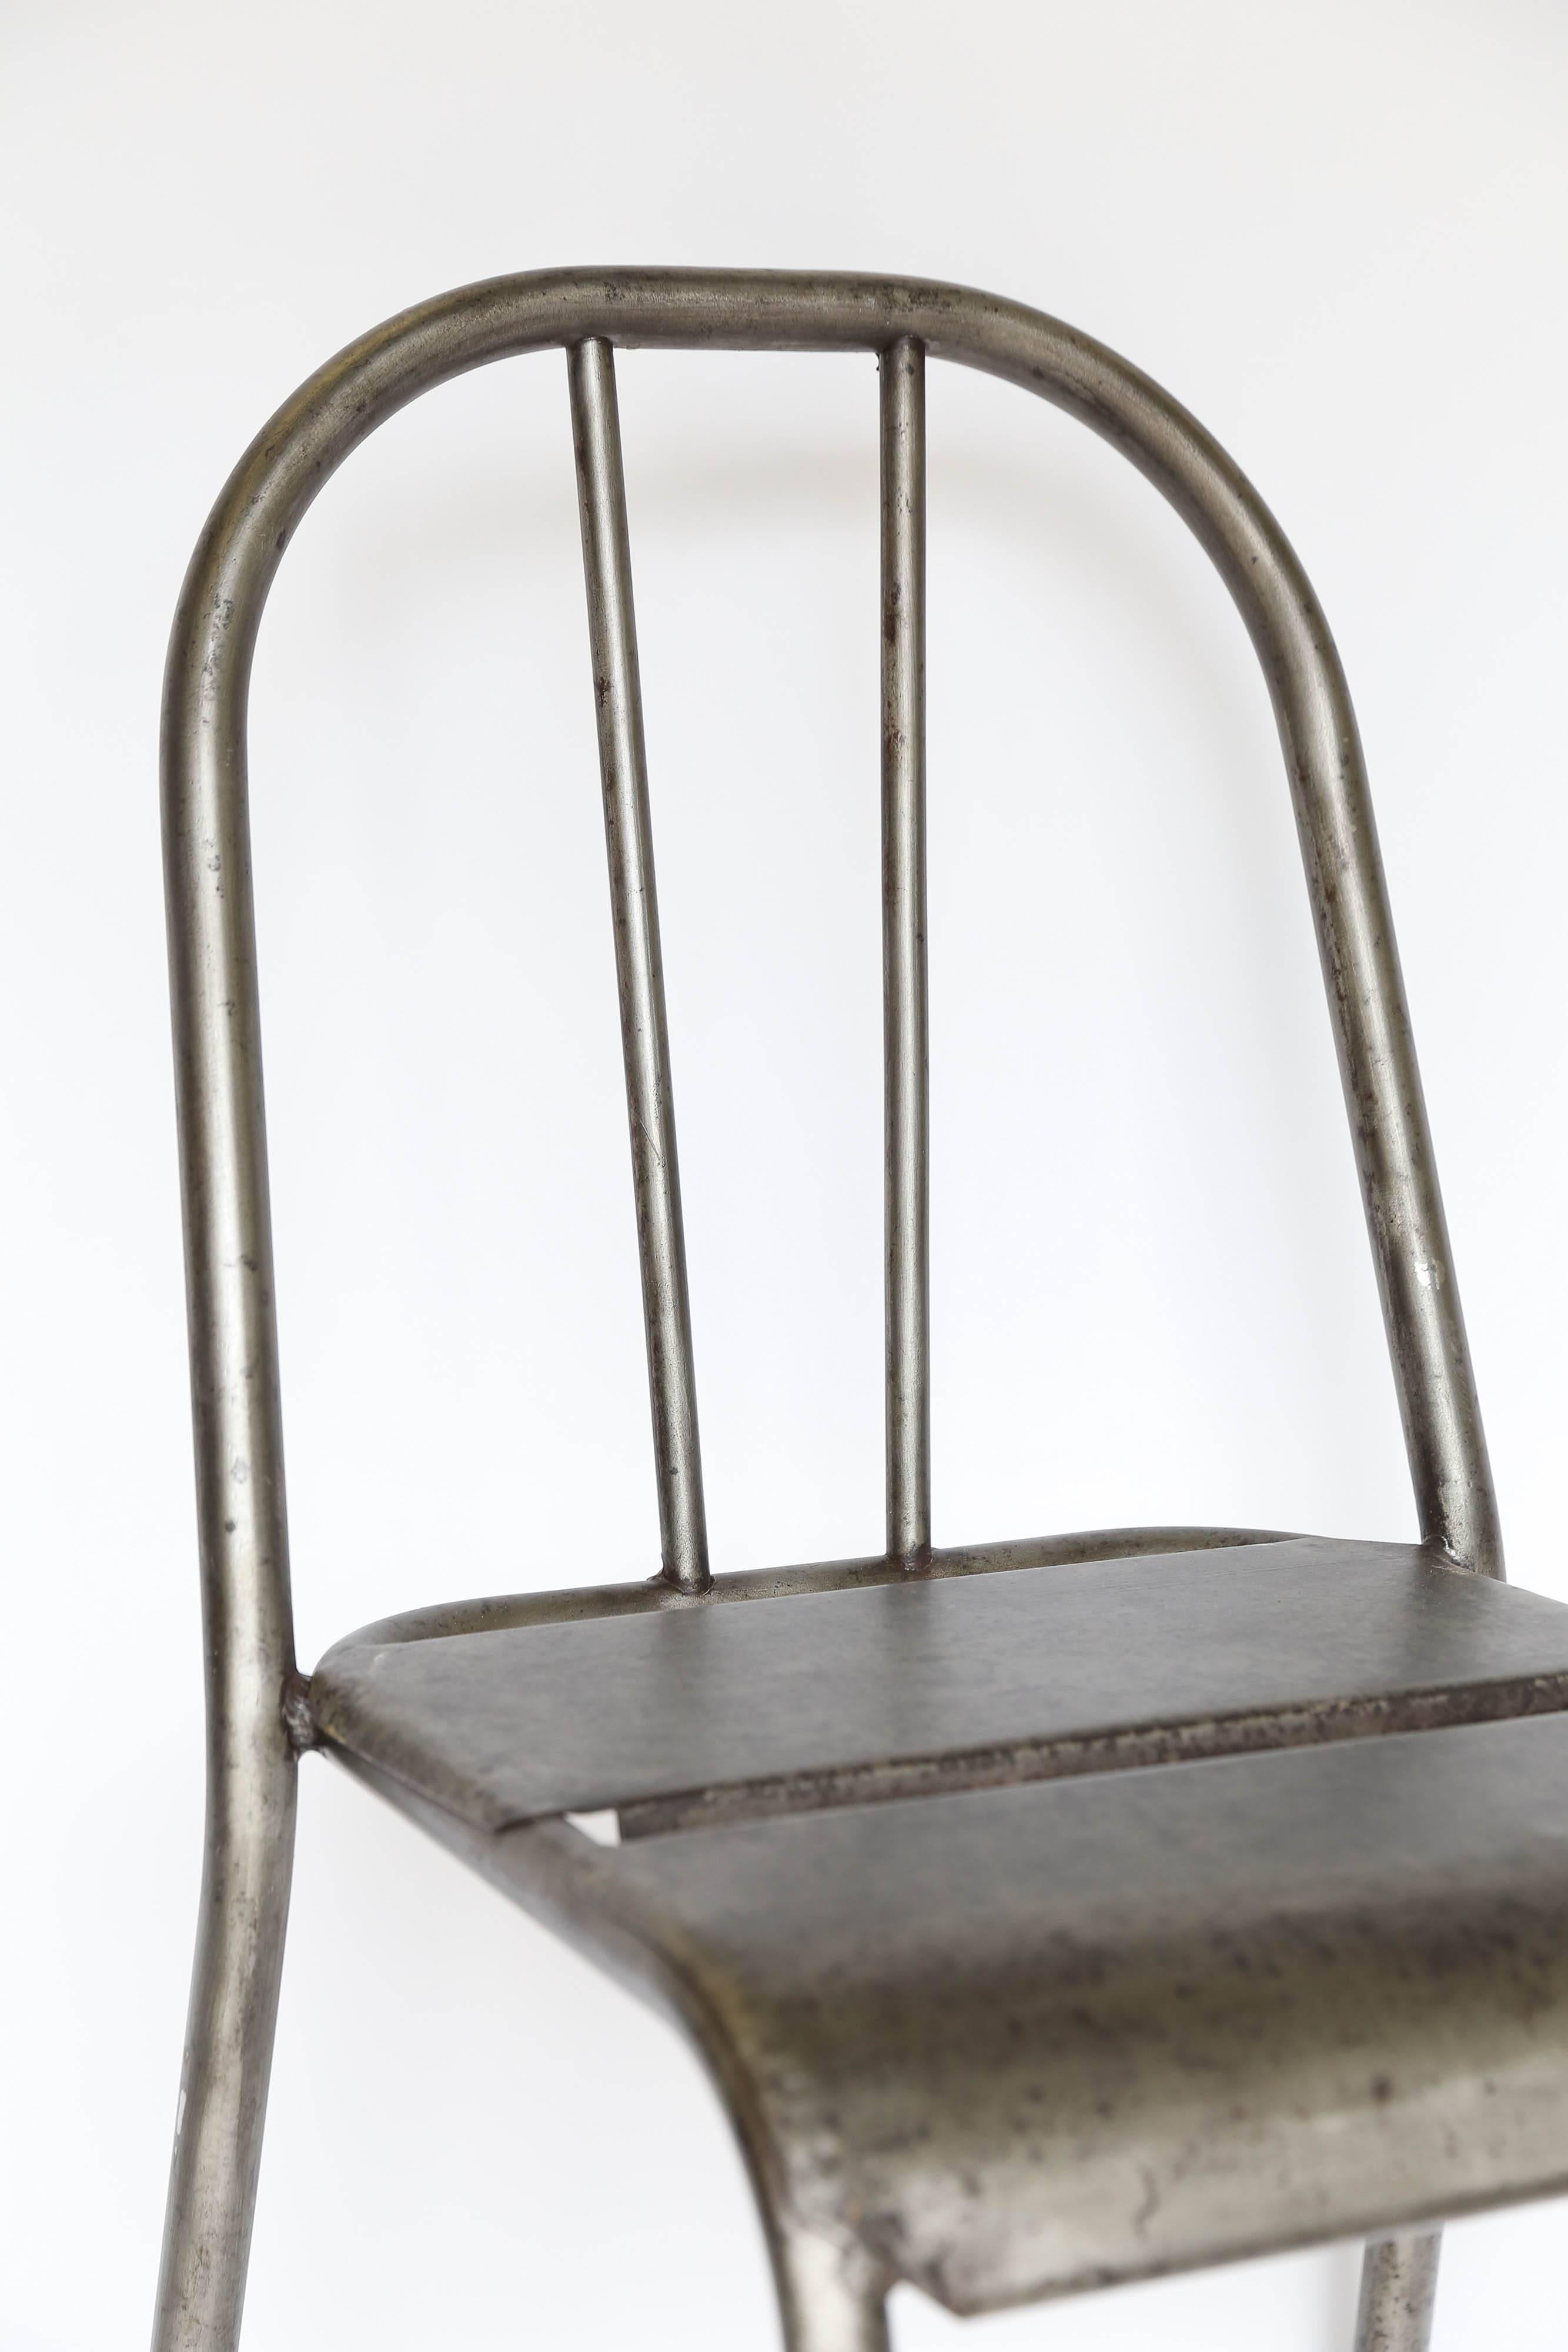 Found in France, a metal side chair with an Industrial flair. Substantial weight, a wonderful patina and sculptural lines give it style while the waterfall edge on the front of the seat makes this an unusually comfortable chair. Five are available.